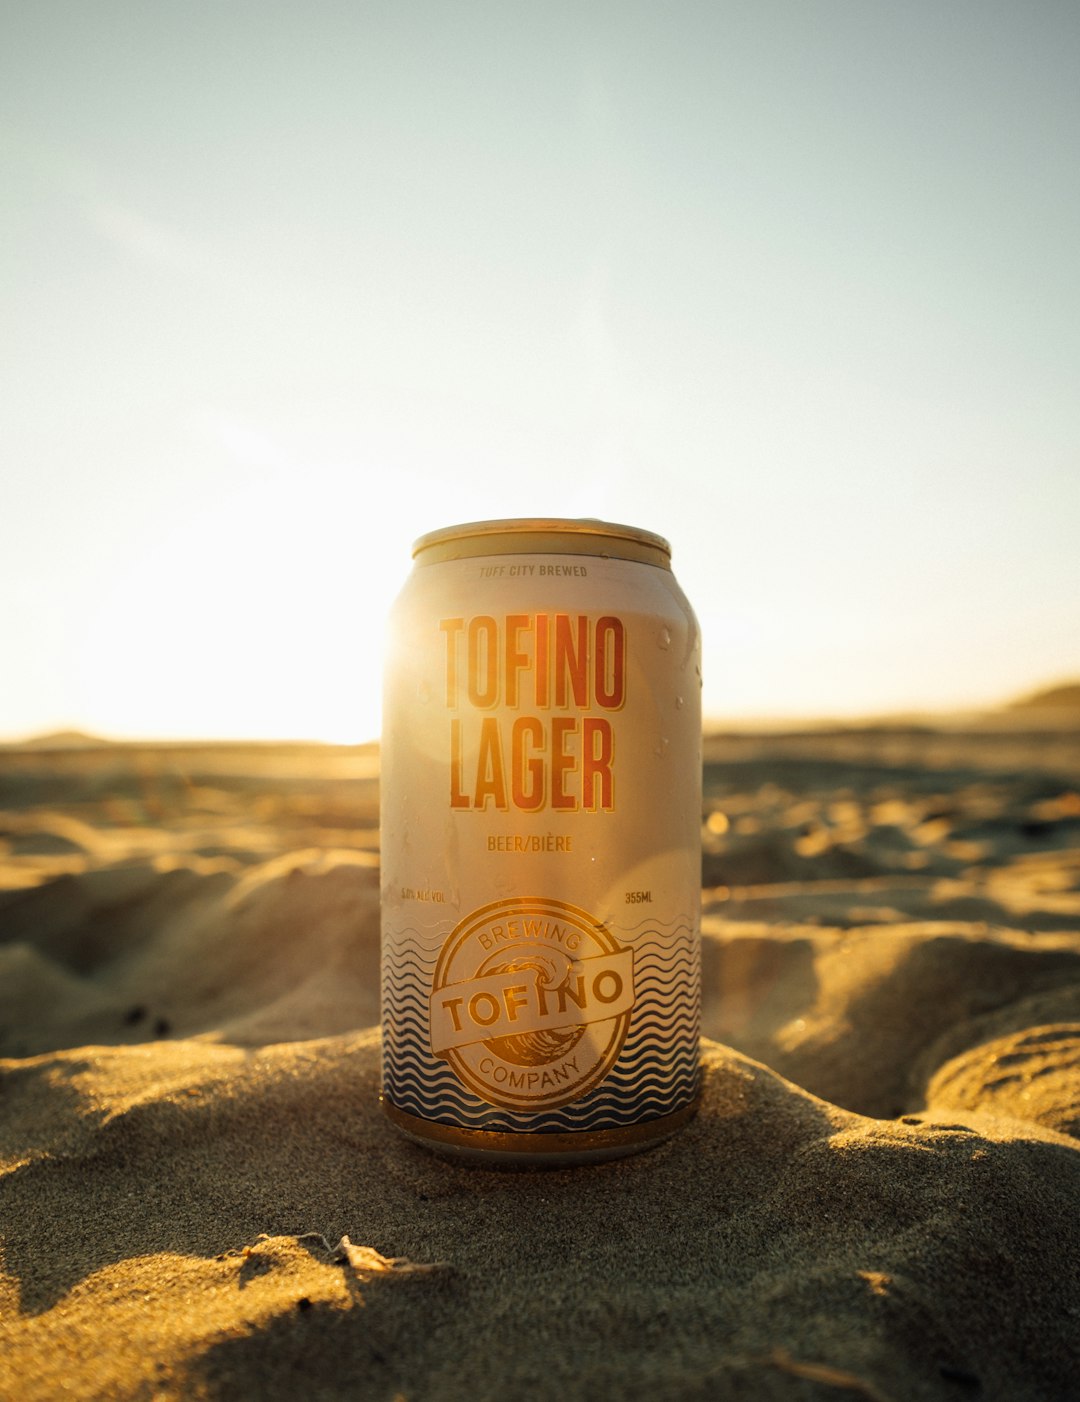 Tofino Lager beer can on sand